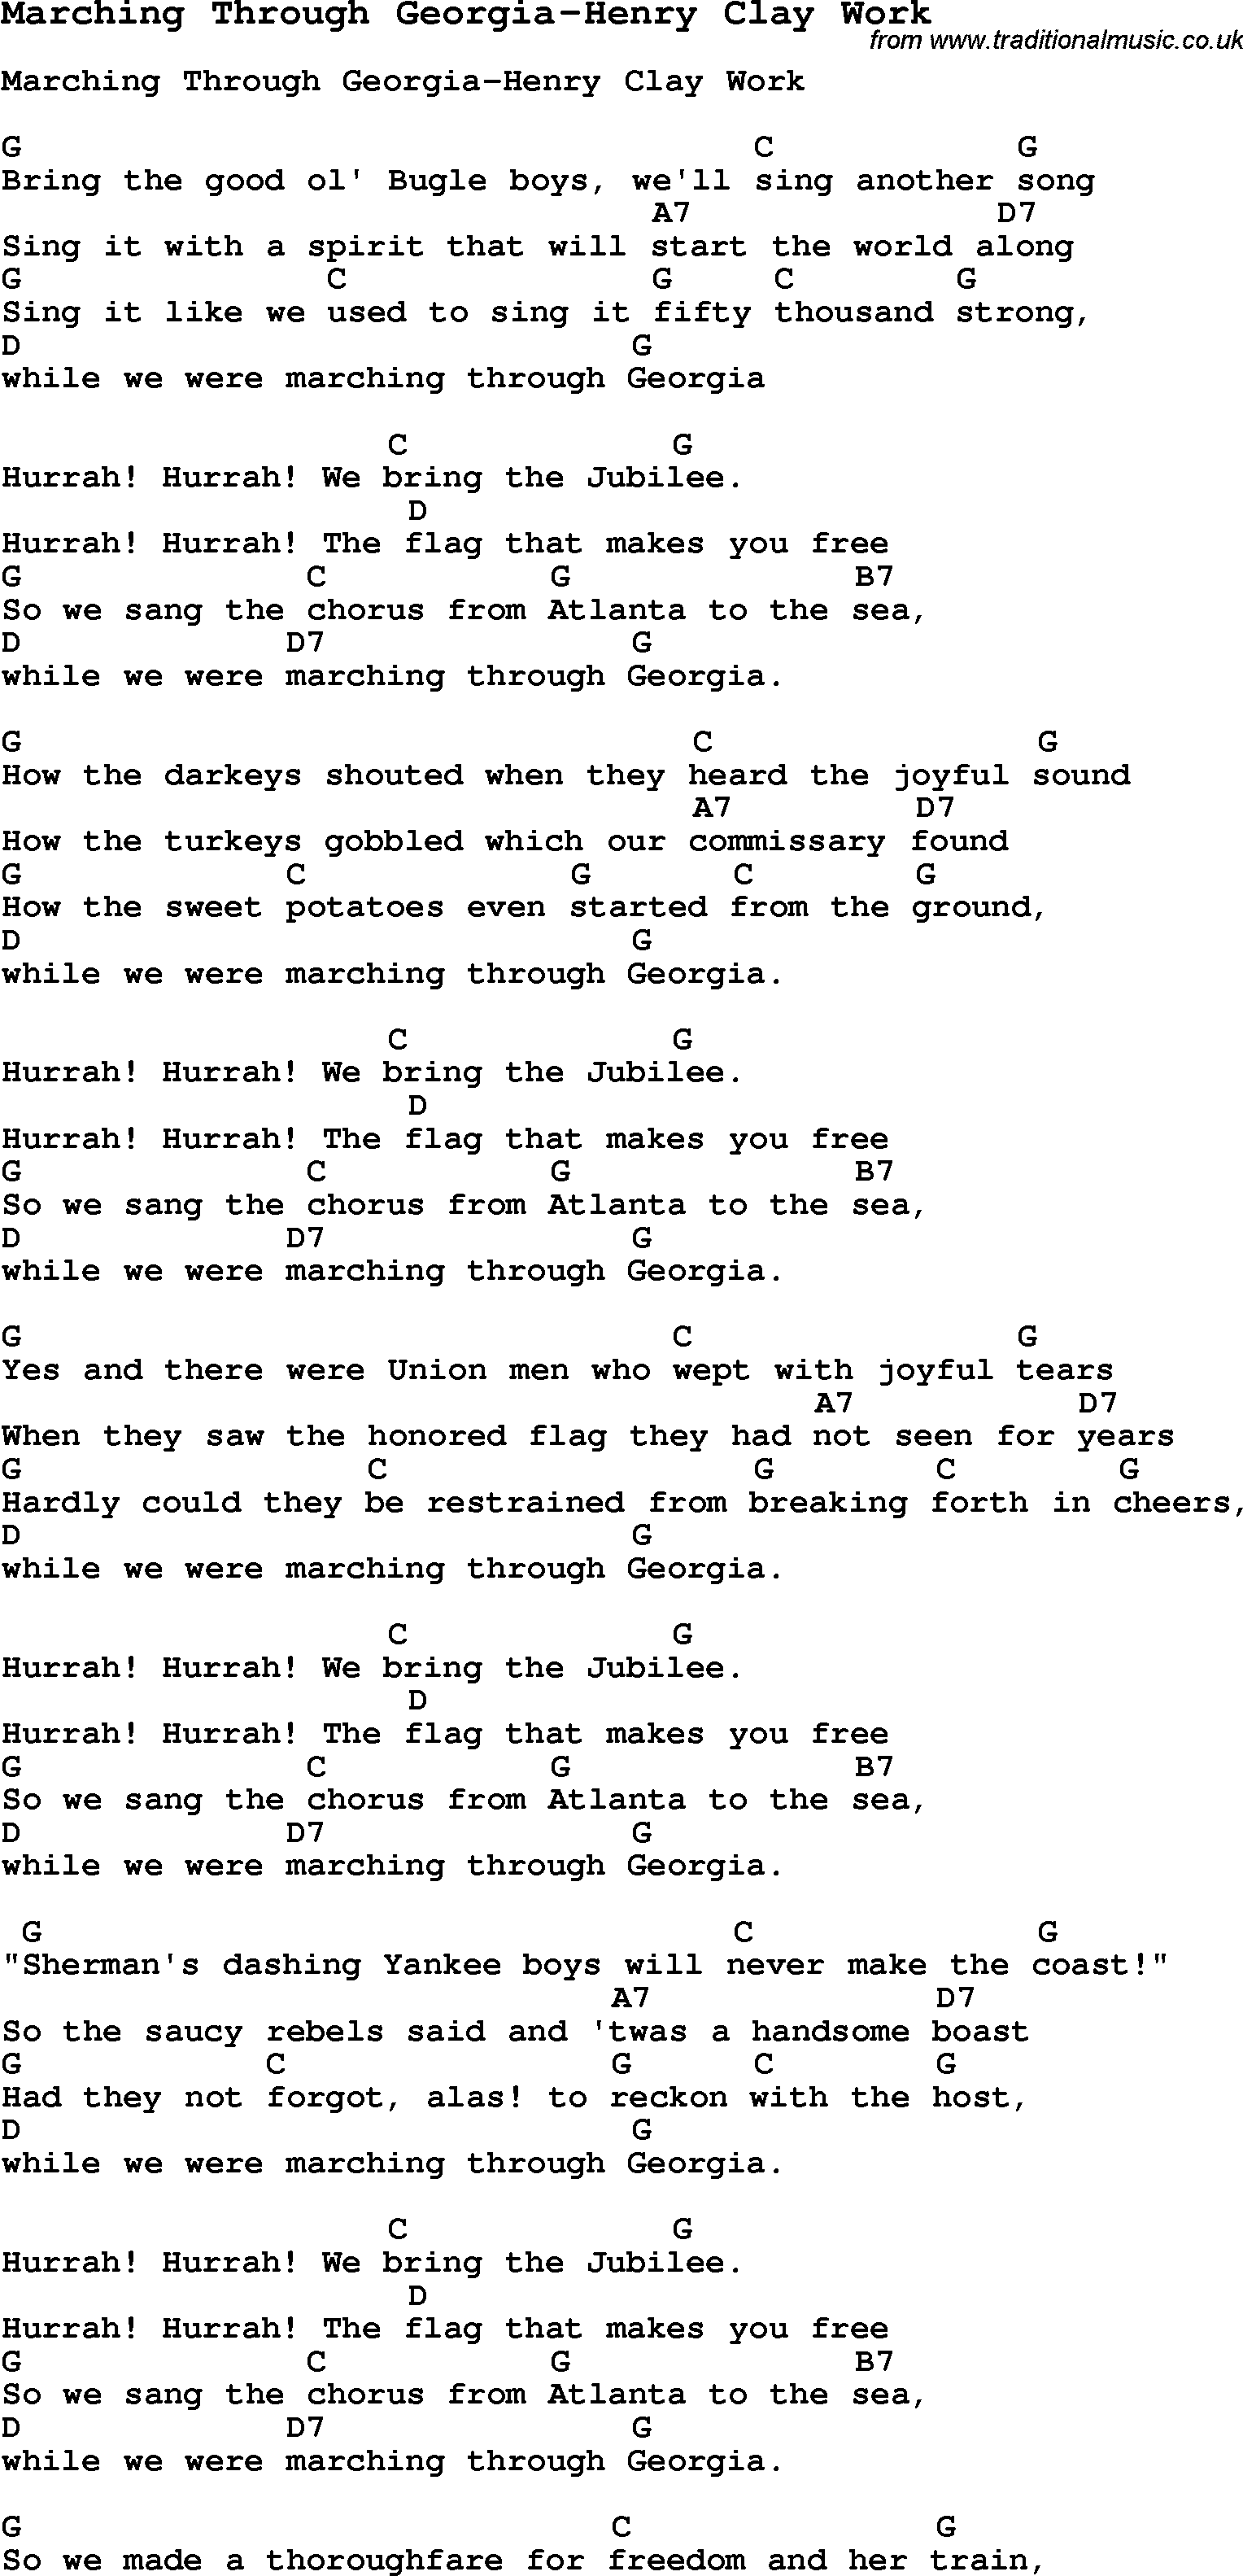 Summer-Camp Song, Marching Through Georgia-Henry Clay Work, with lyrics and chords for Ukulele, Guitar Banjo etc.